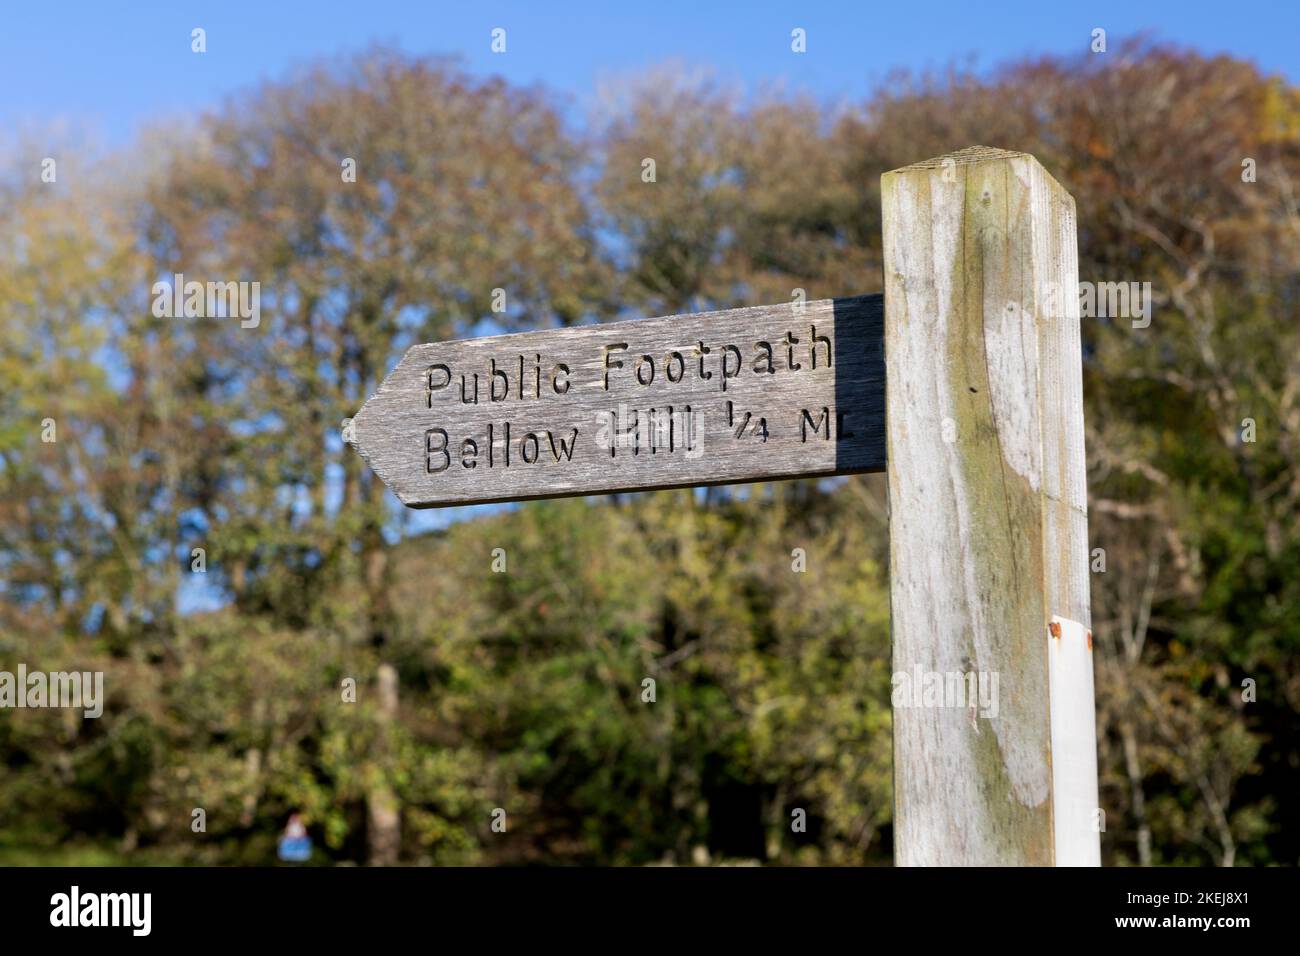 A wooden signpost giving directions to Bellow Hill, Yorkshie. Stock Photo